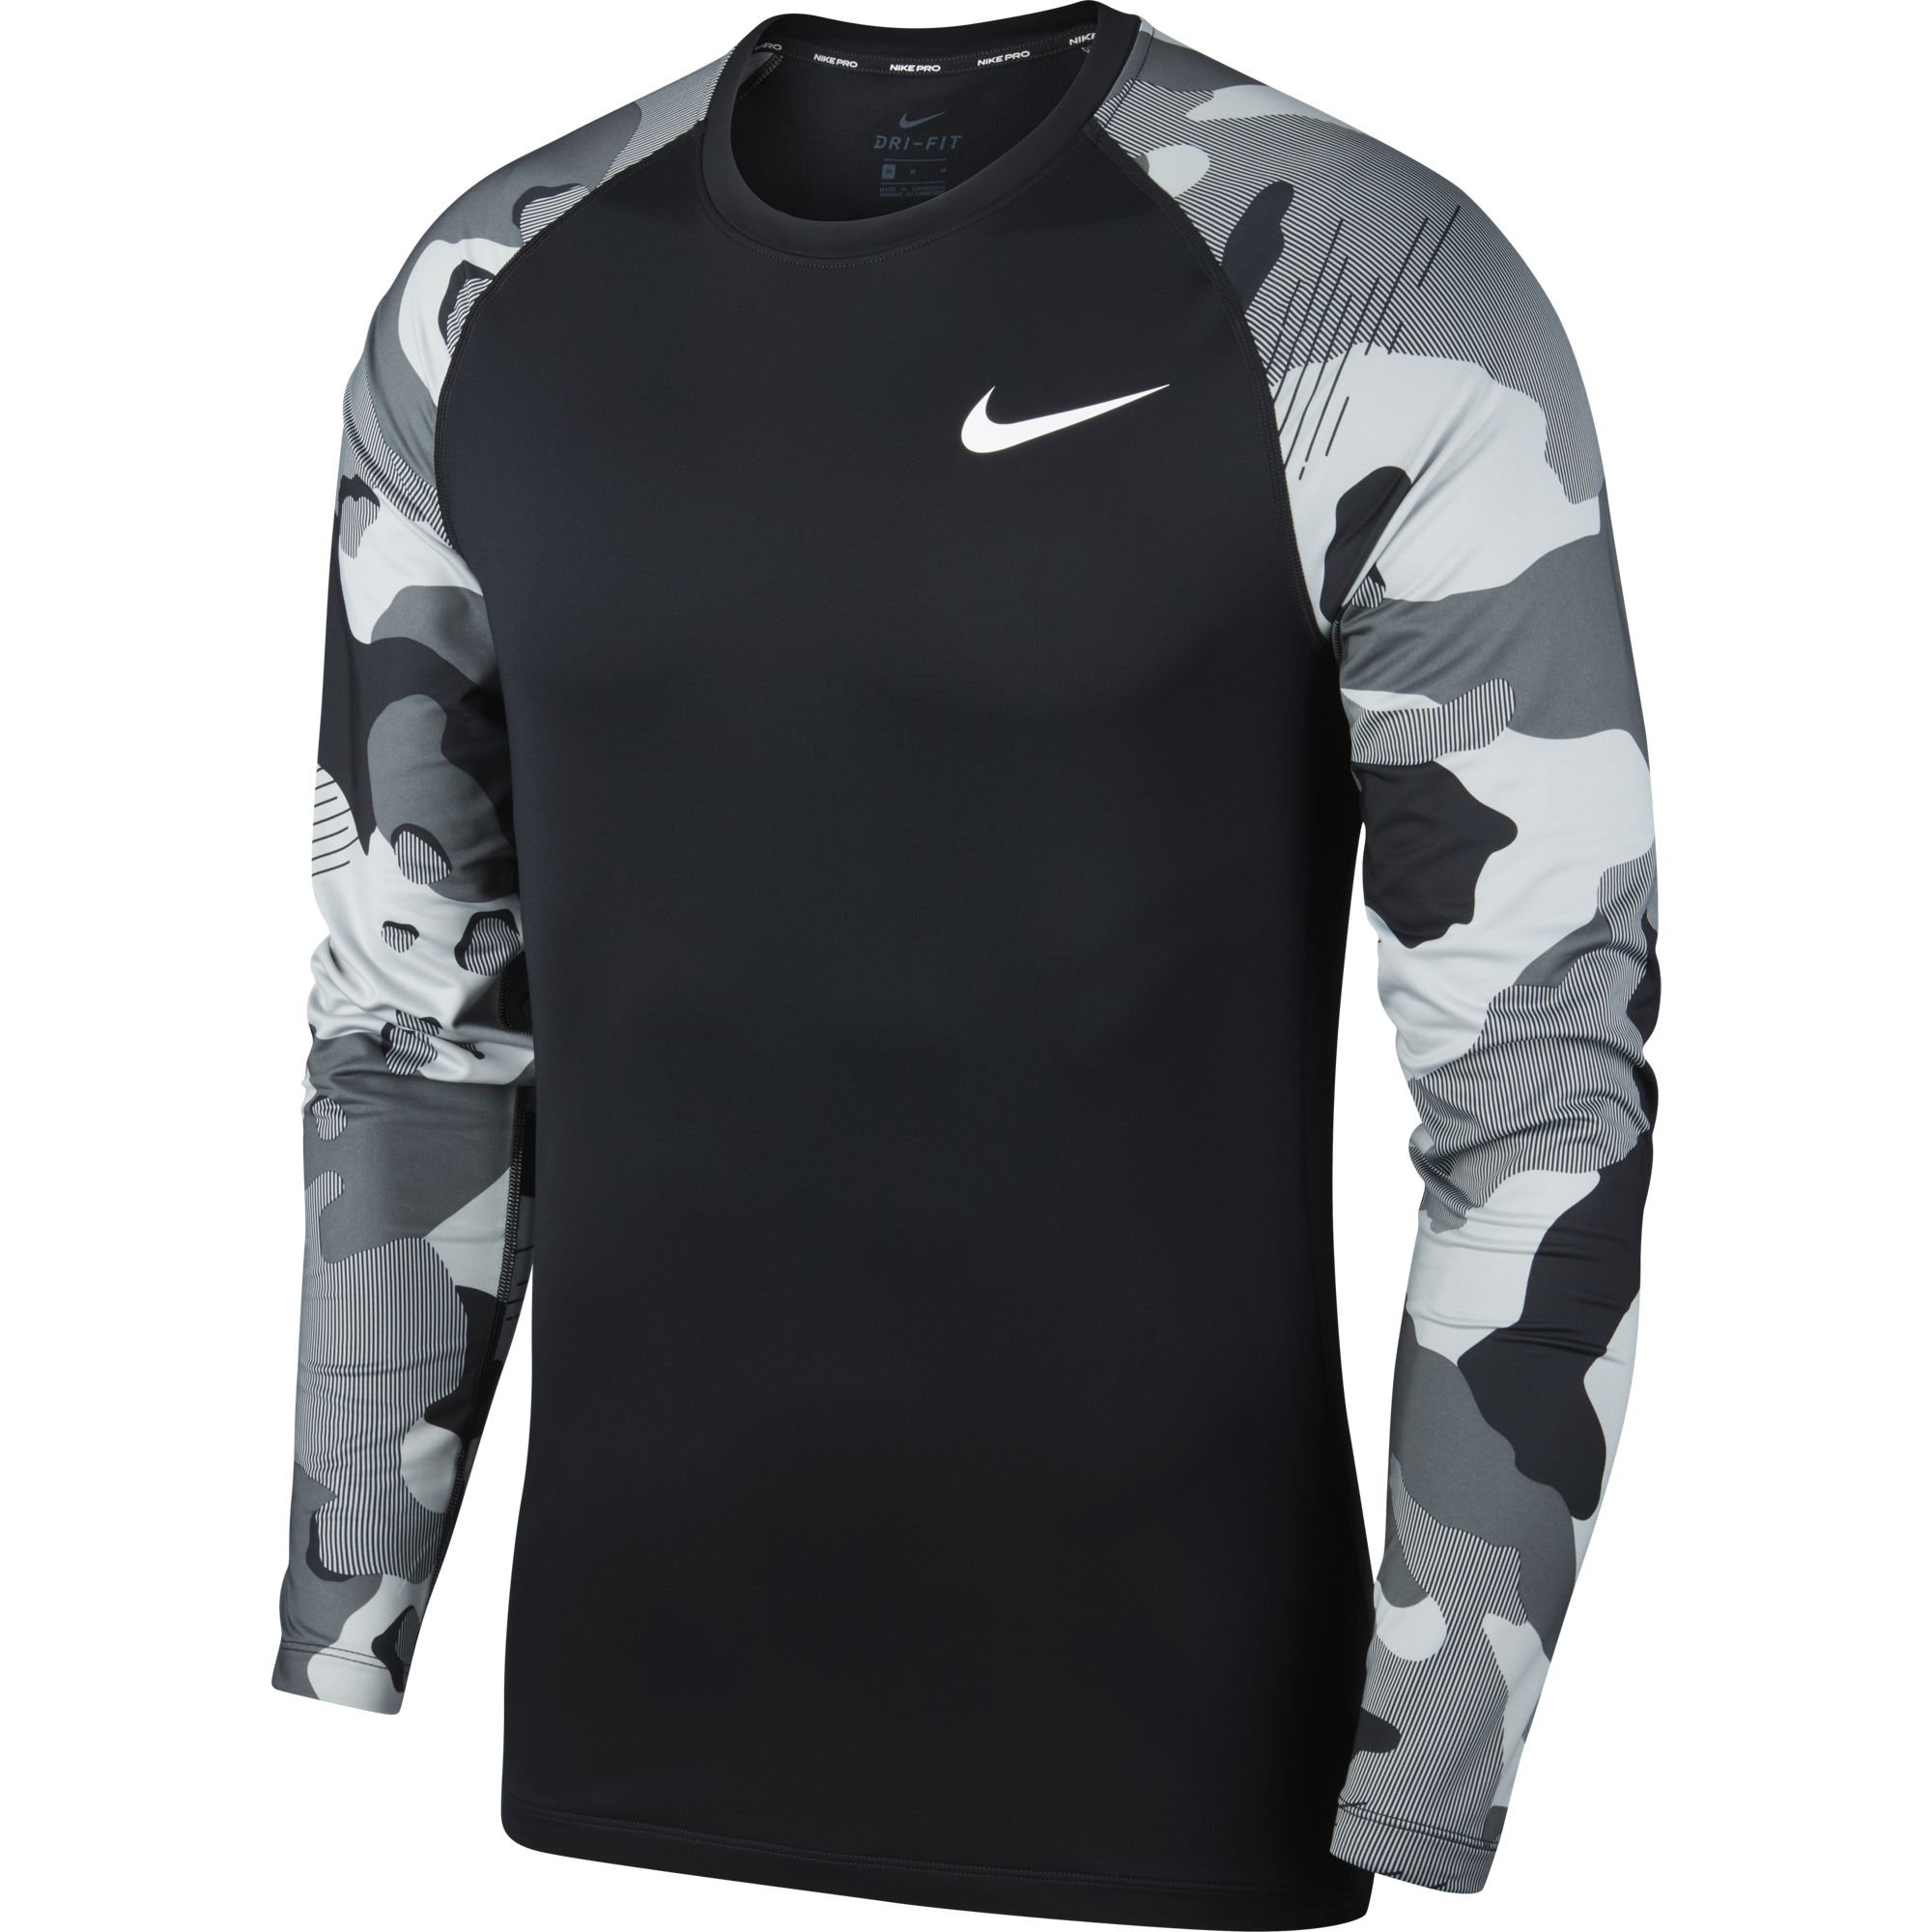 Nike pro combat clothing: NIKE | Tactical Gear Superstore